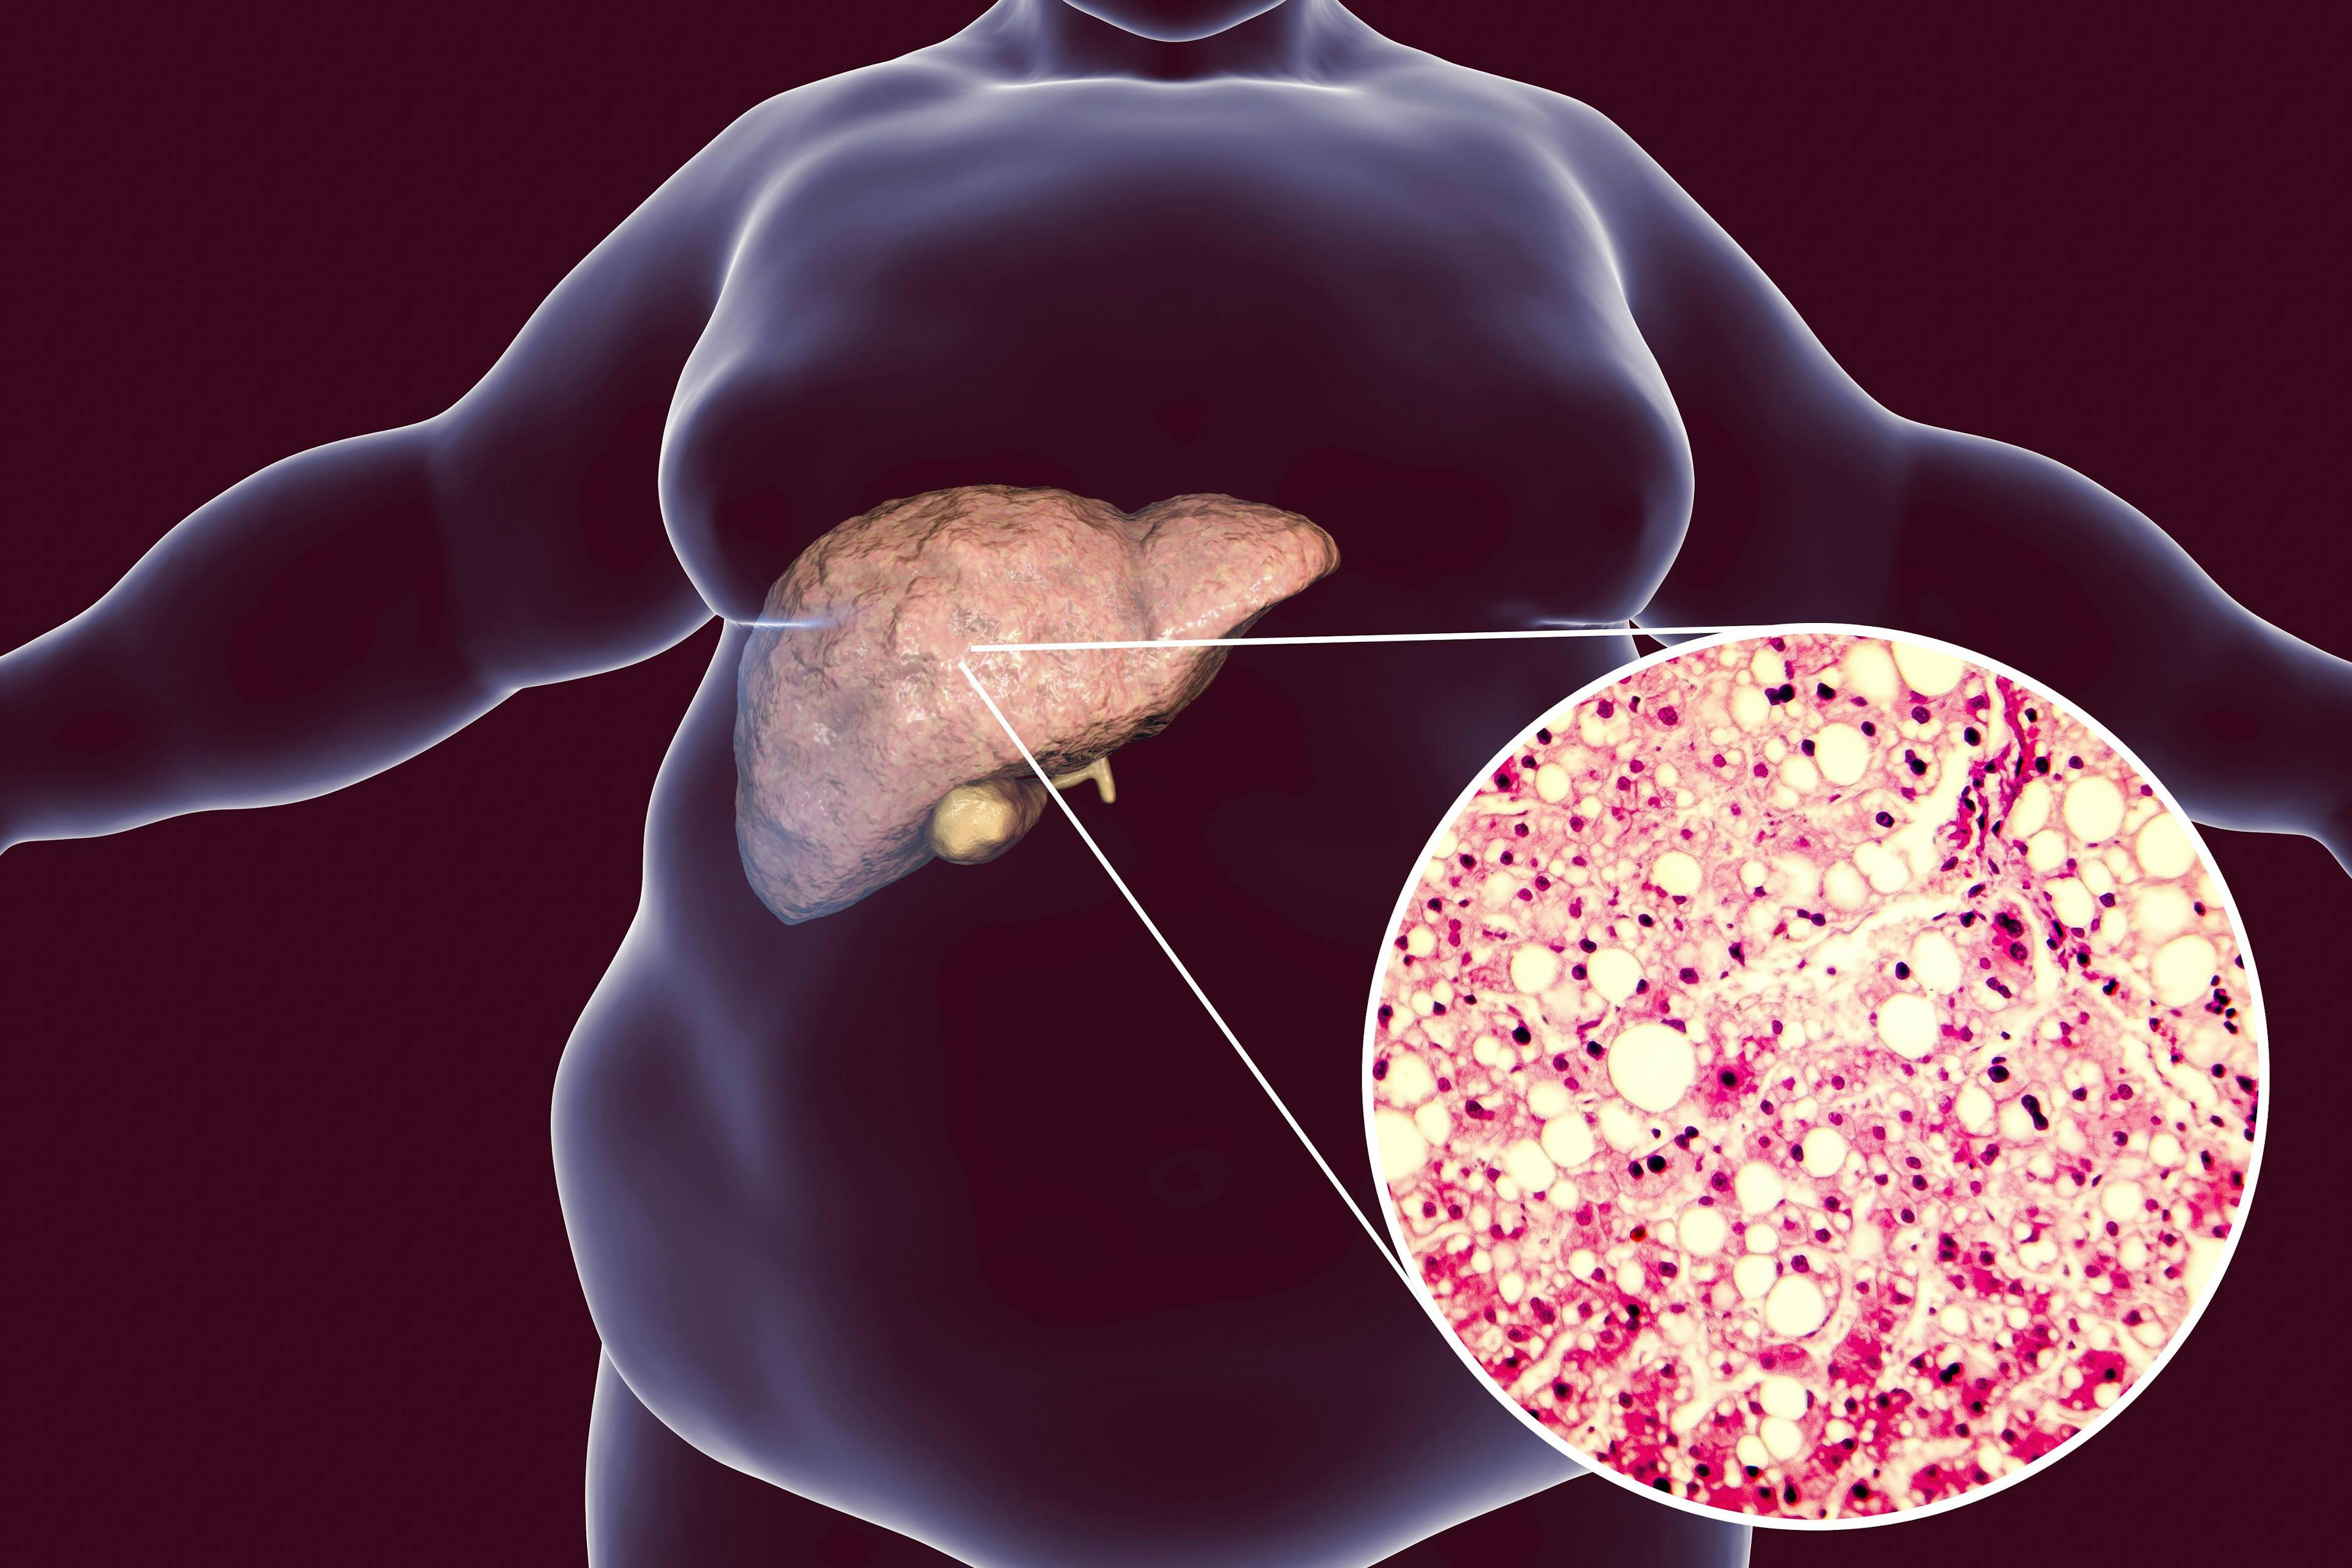 This finding, in addition to published clinical data, suggests VEGF-B signaling may play a significant role in human non-alcoholic fatty liver disease pathophysiology. 